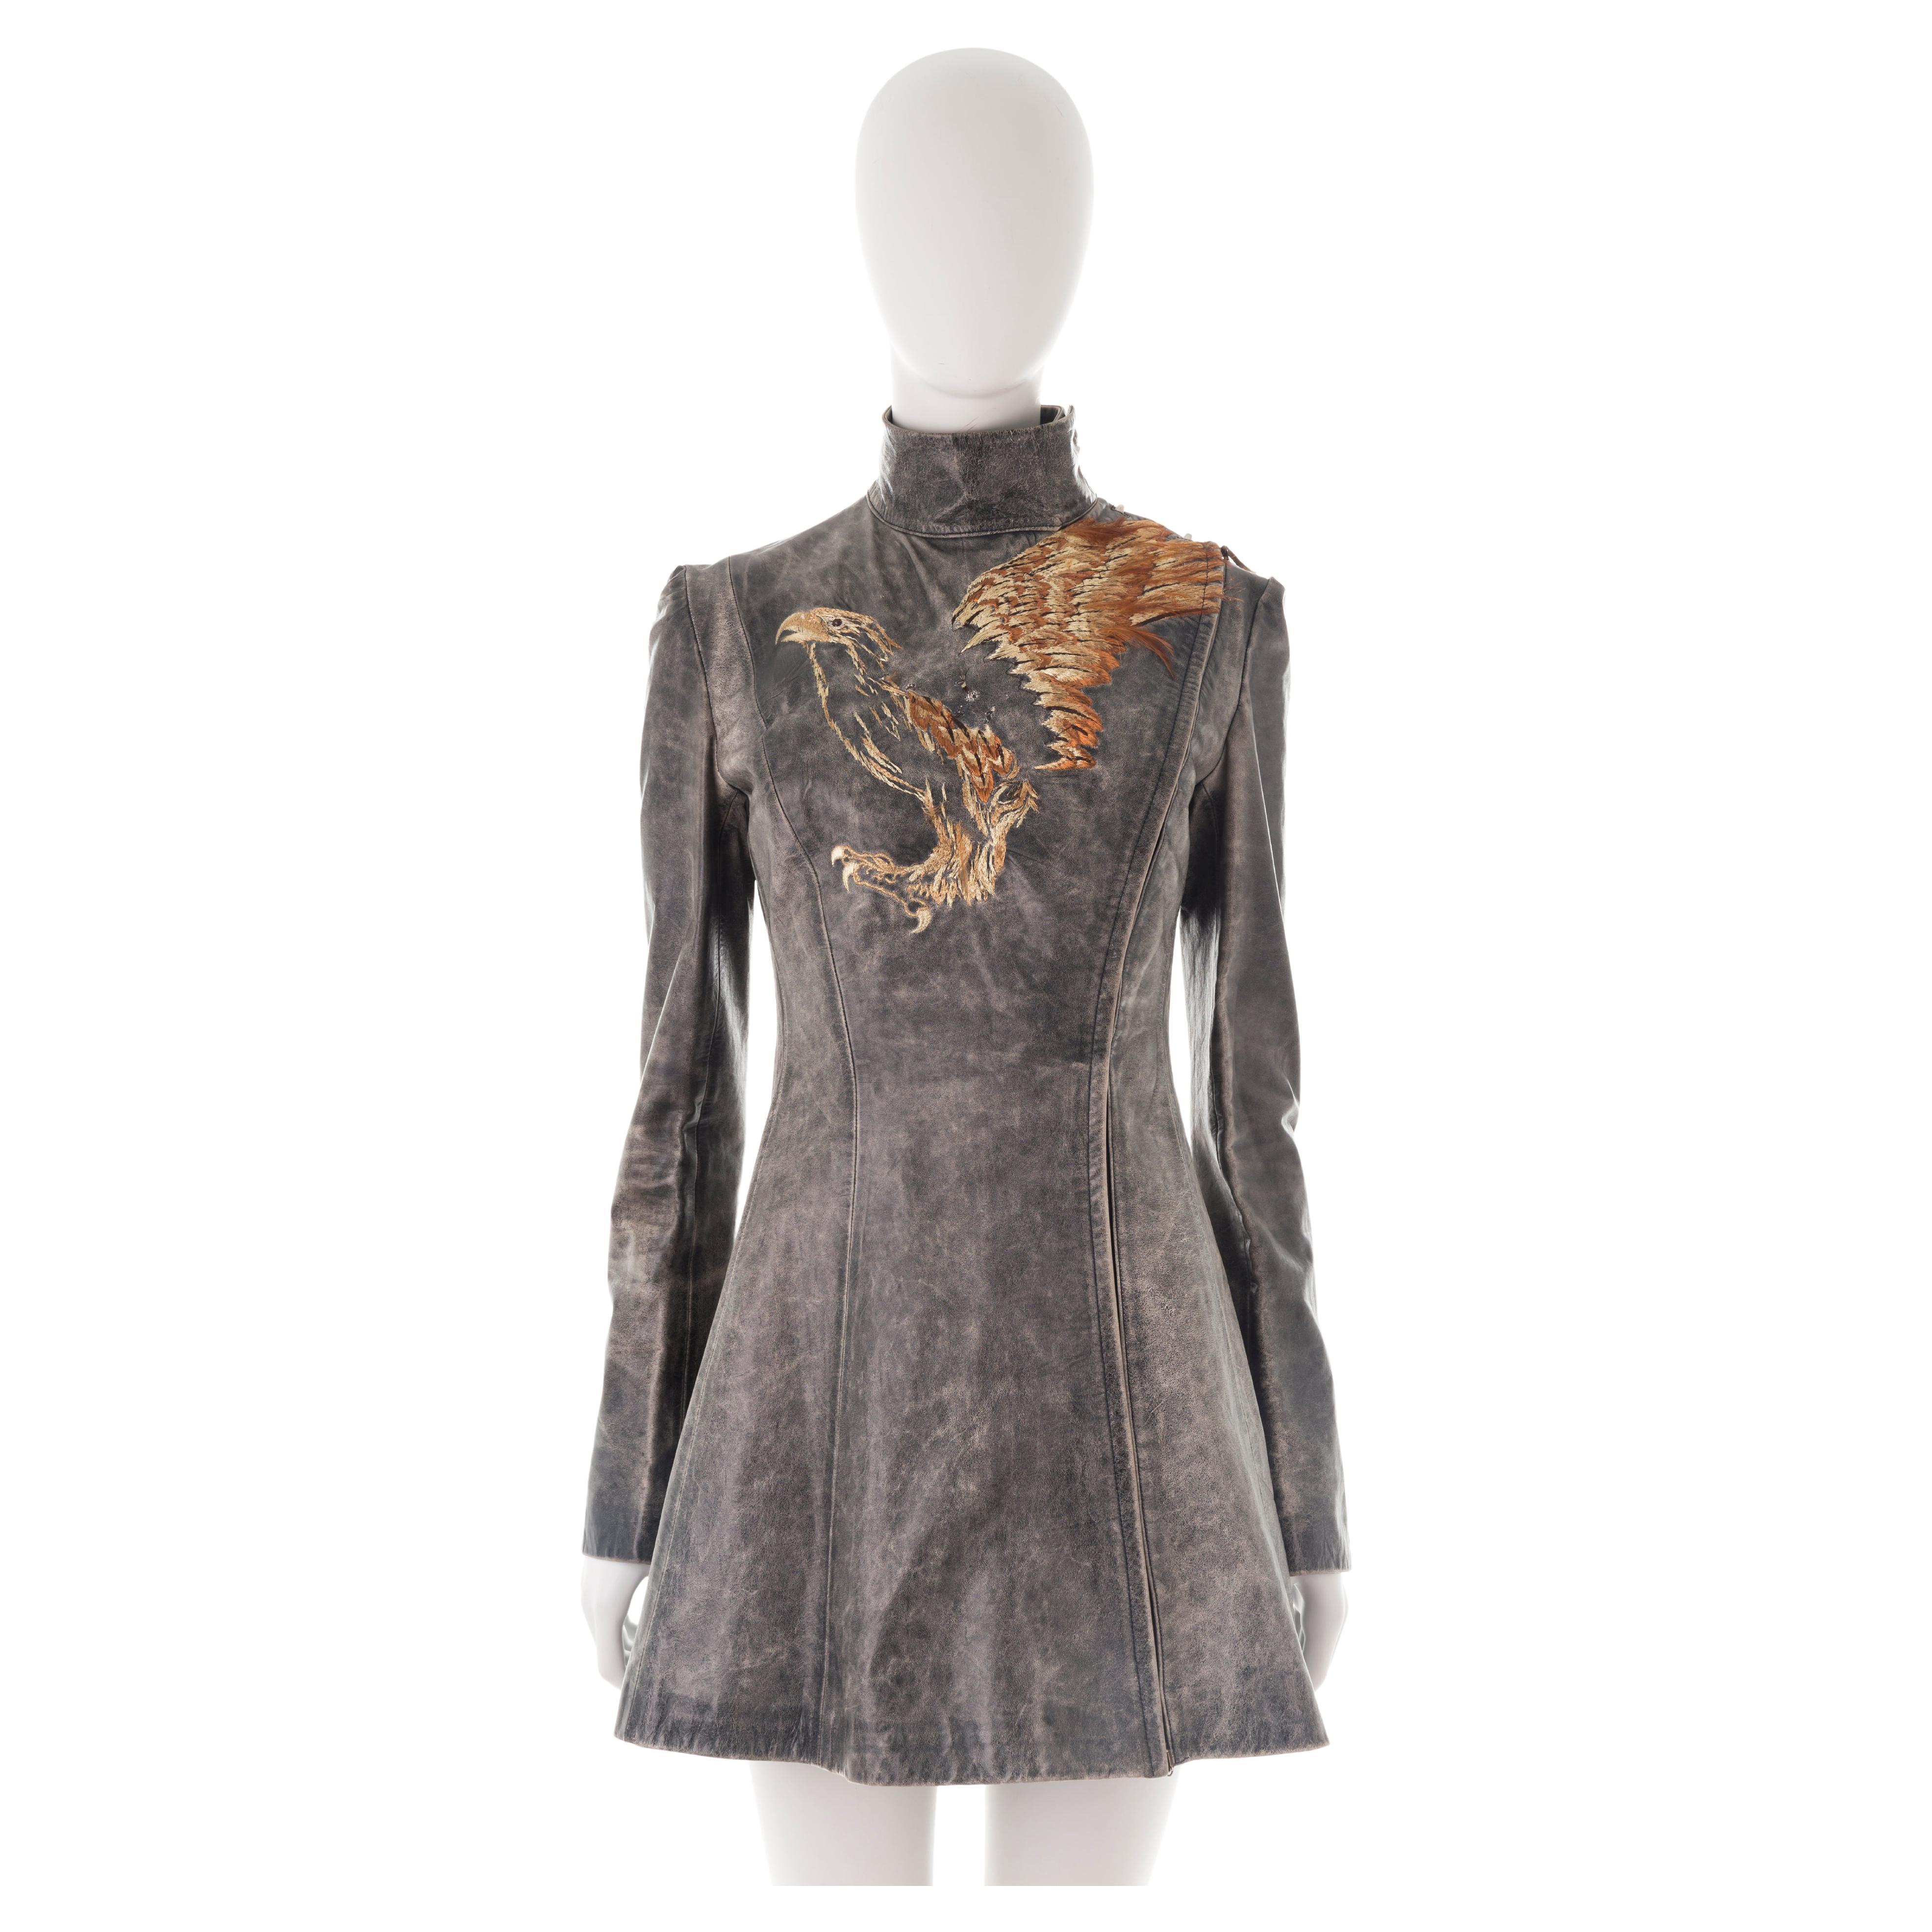 - Roberto Cavalli long sleeve mini dress
- Sold by Gold Palms Vintage
- Fall/Winter 2001
- Embroidered Phoenix motif with real feathers
- Brown soft distressed leather 
- Asymmetrical side zipper with collar hook fastenings
- Body-hugging fit
- Size